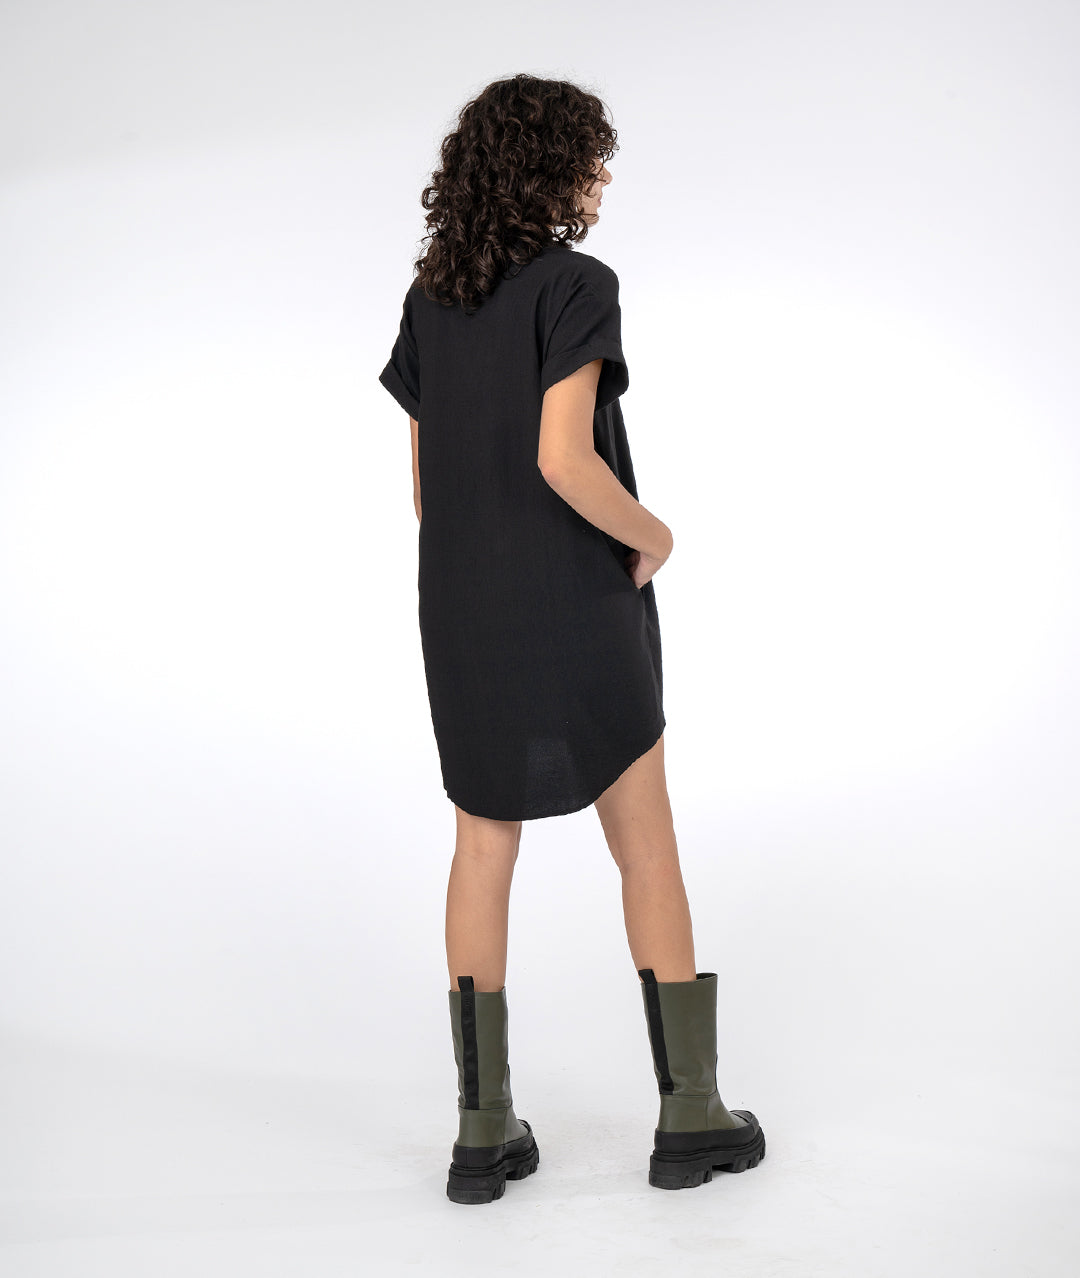 model in a boxy black dress with short cuffed sleeves and a vneck